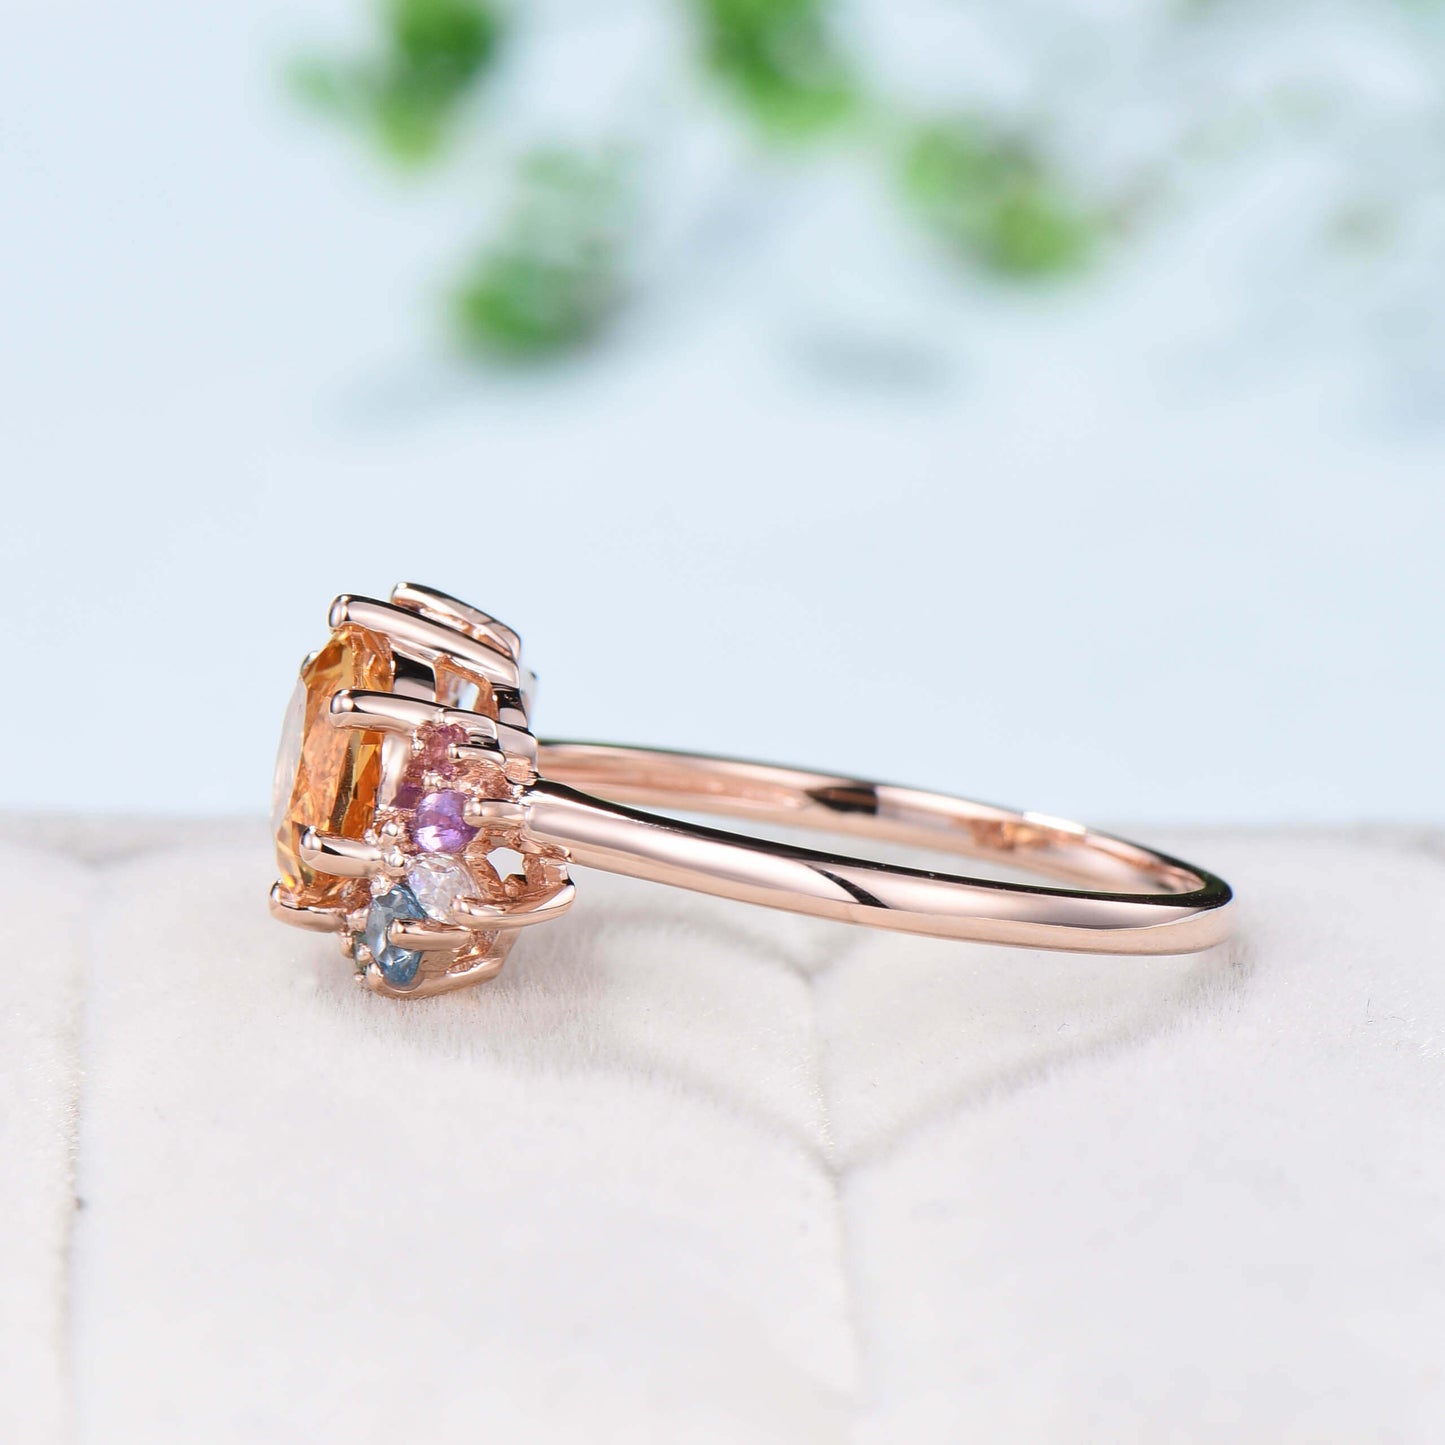 Unique Rainbow Engagement Ring Vintage Citrine Engagement Ring Gold Cluster Natural Crystal Wedding Ring For Women art deco Anniversary Gift - PENFINE